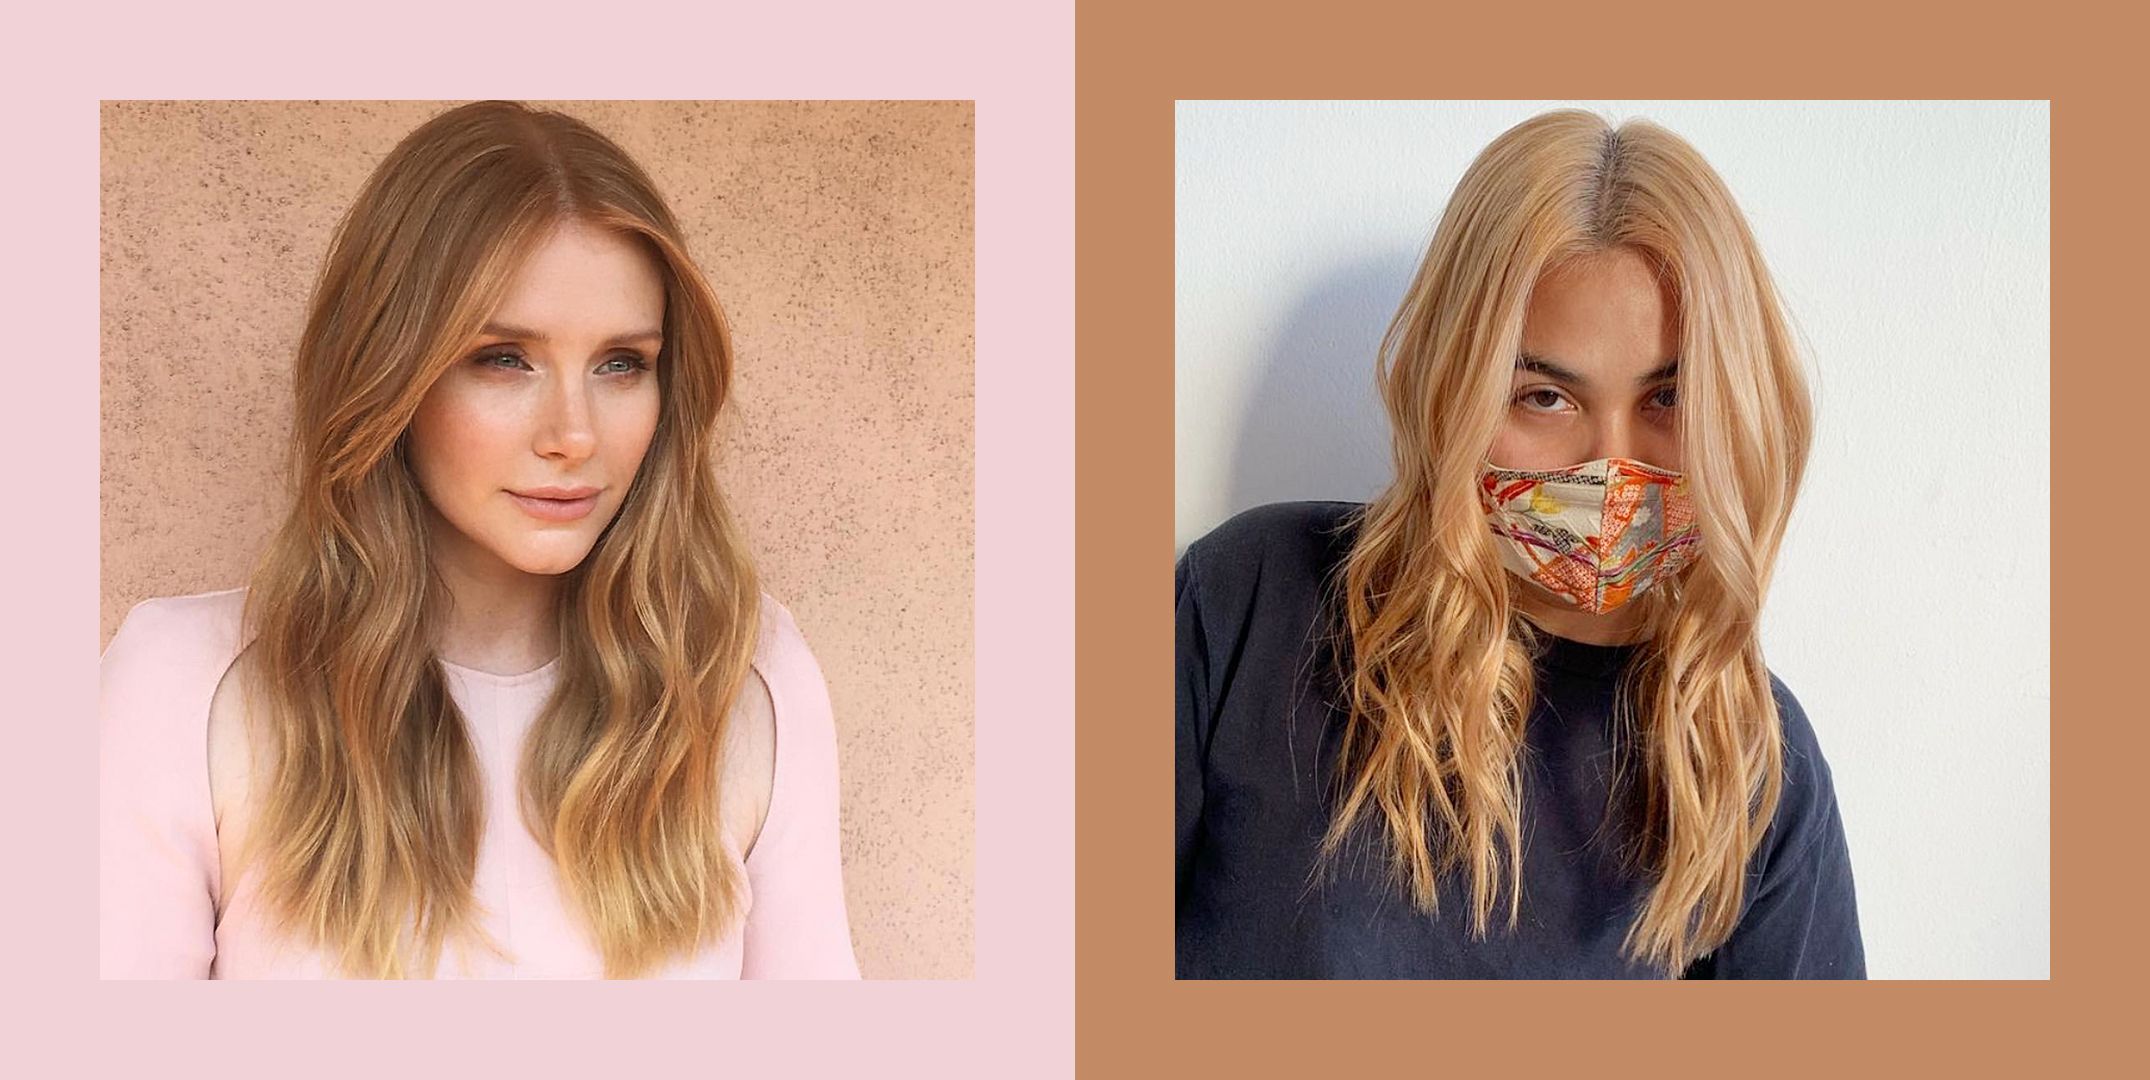 Strawberry Blonde Hair Color: 20 Amazing Shades You Need to Try - wide 4